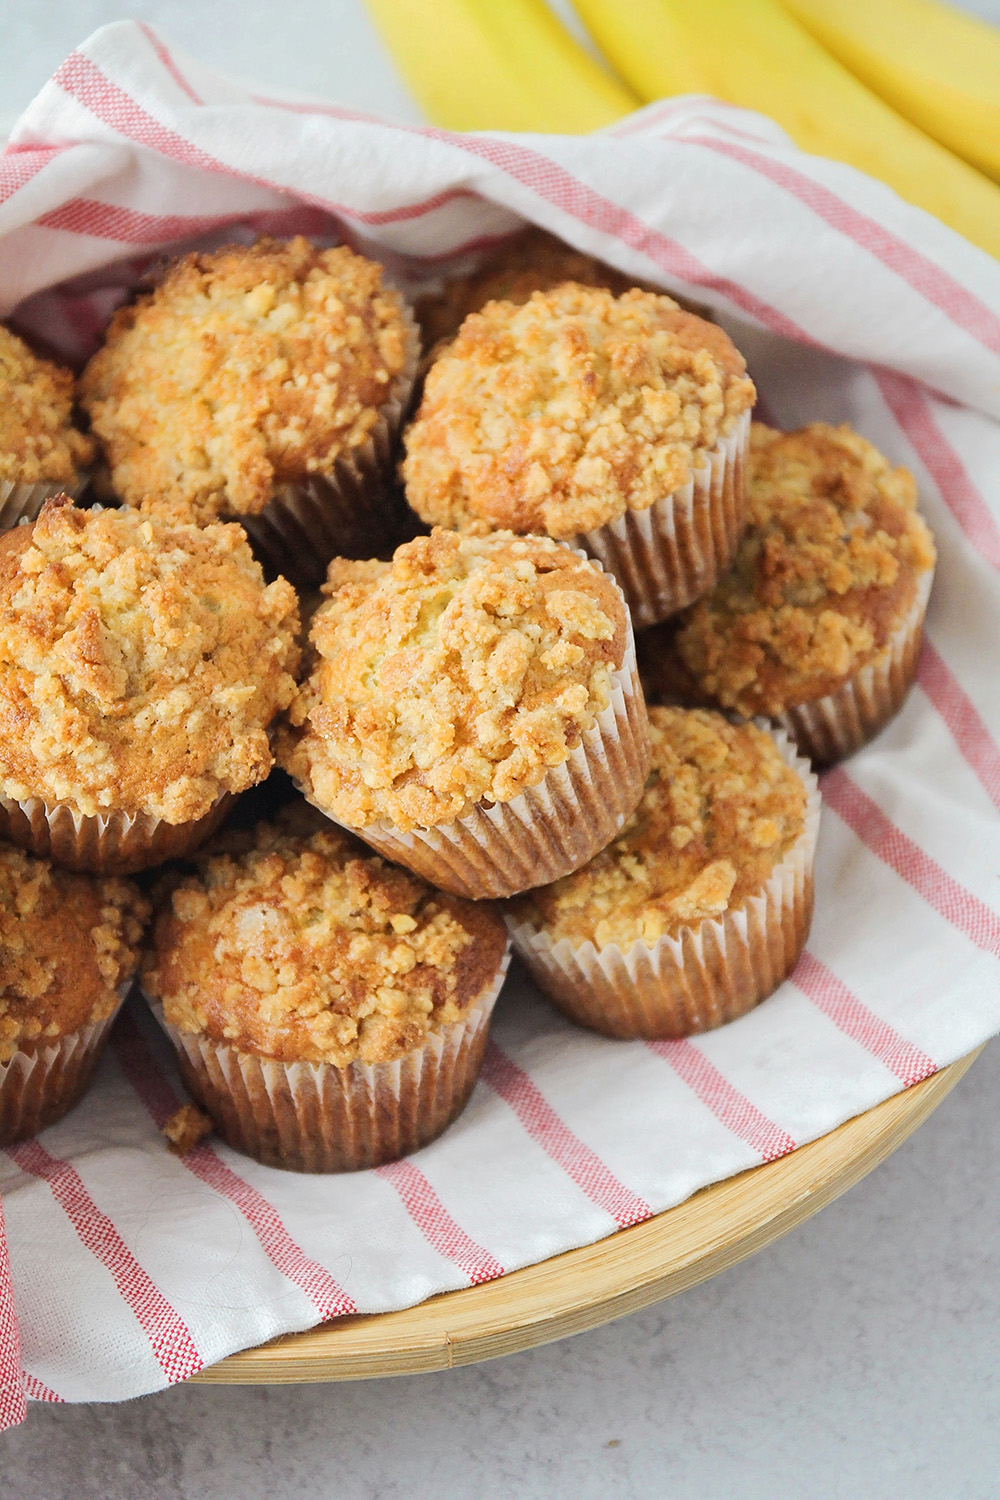 These buttery and tender banana streusel muffins are so delicious, and so easy to make!